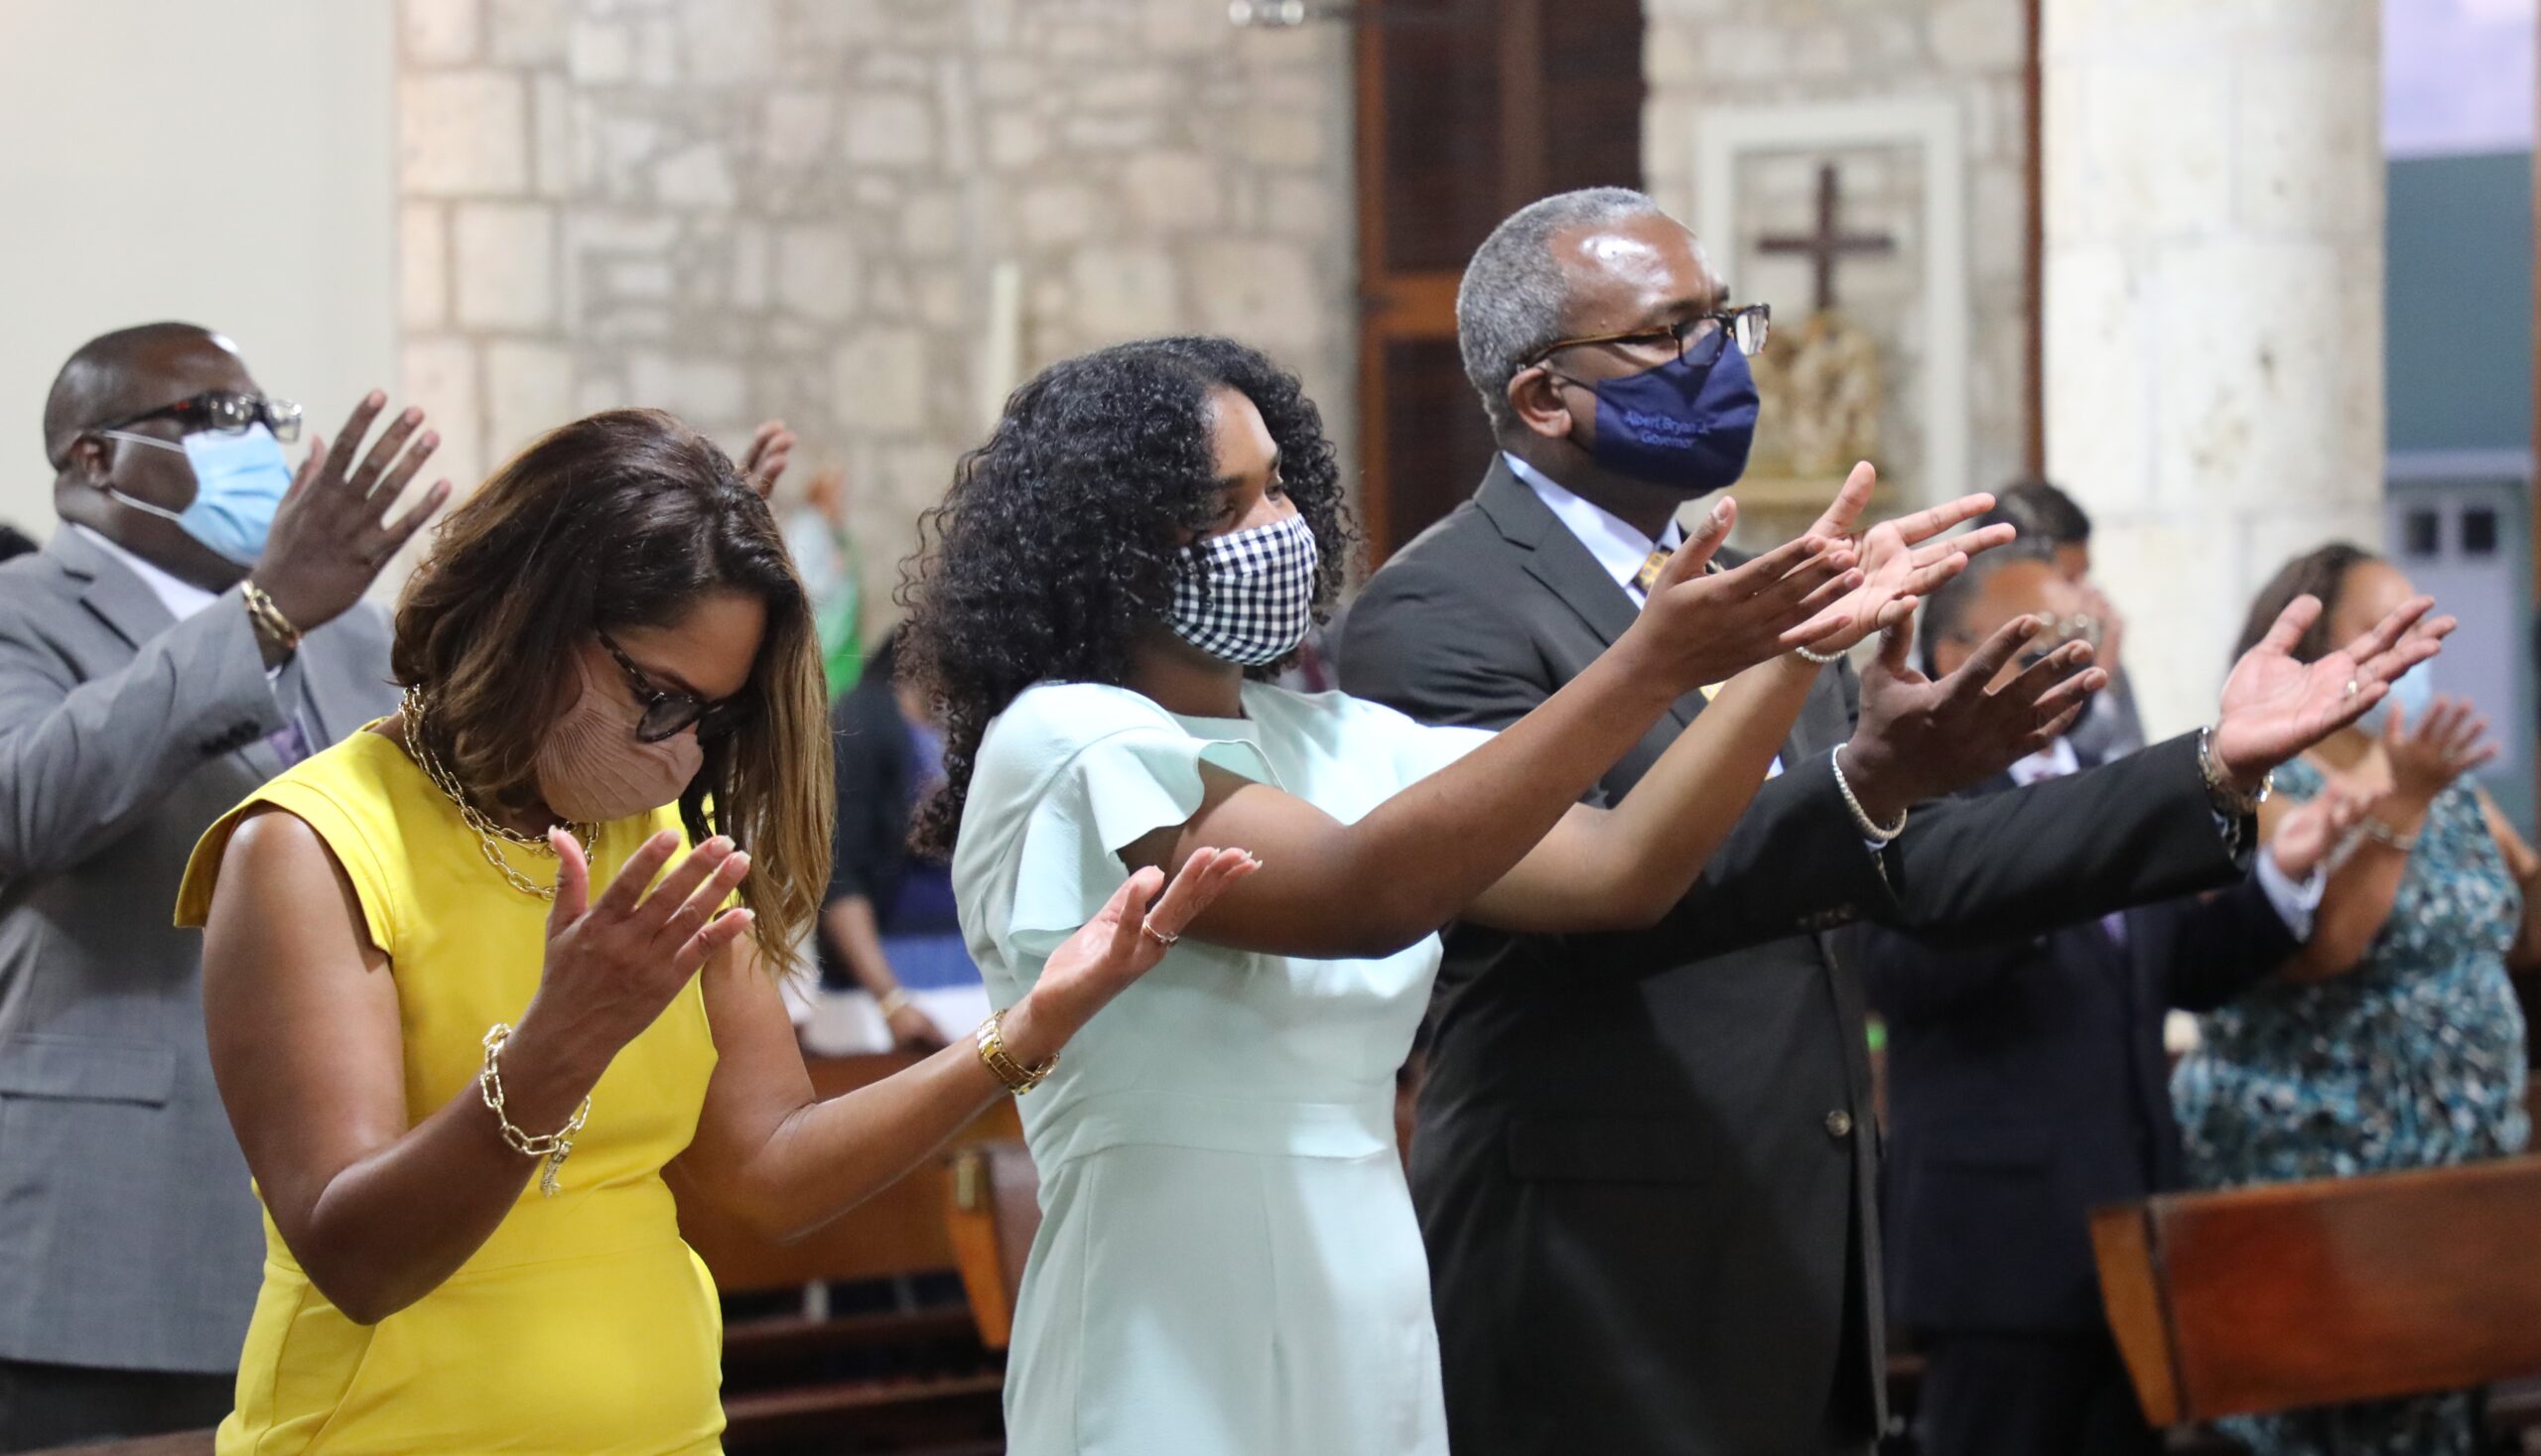 First Lady Yolanda Bryan Does Not 'Stand By Her Man' Governor-Husband Albert During Church Service